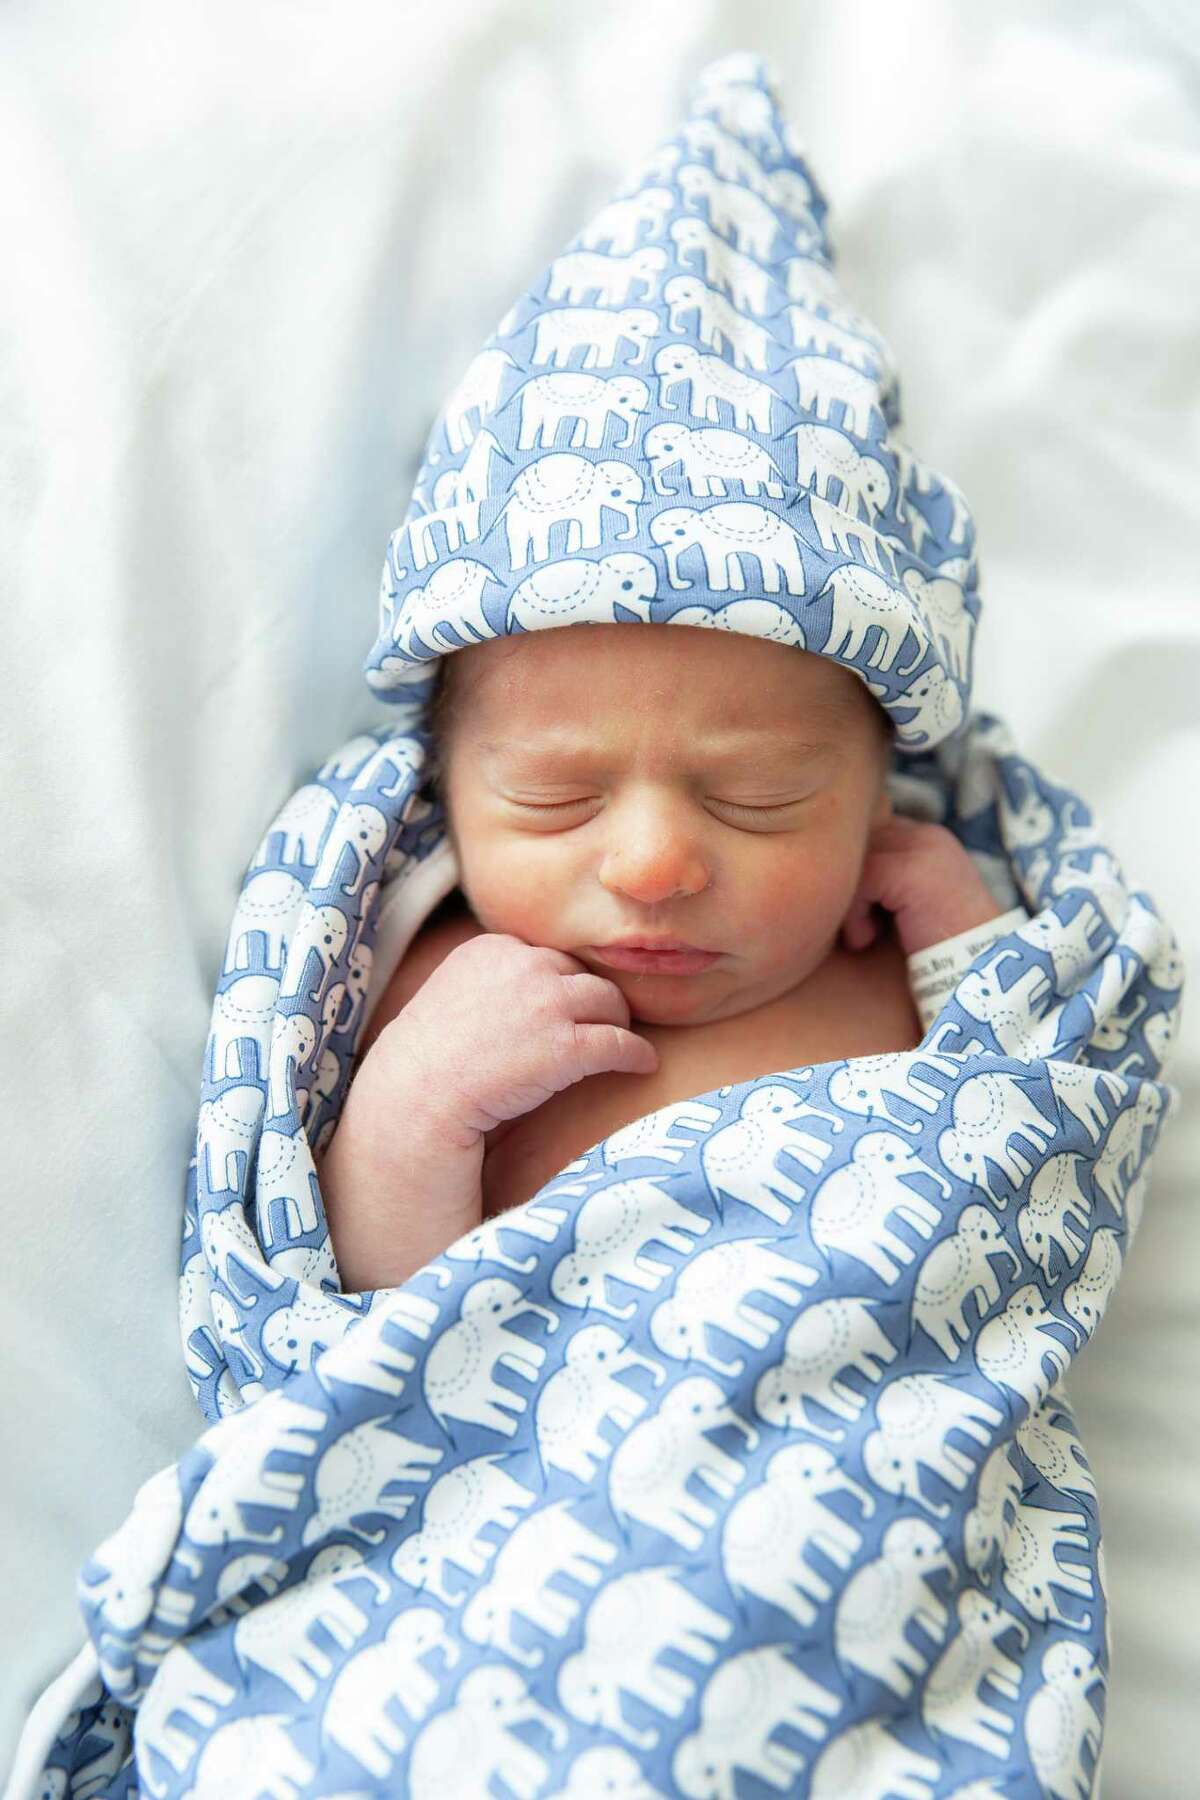 Peter Jensen Cecio was born Jan. 2 at Greenwich Hospital to proud parents Wendy and Peter Cecio of North Stamford.